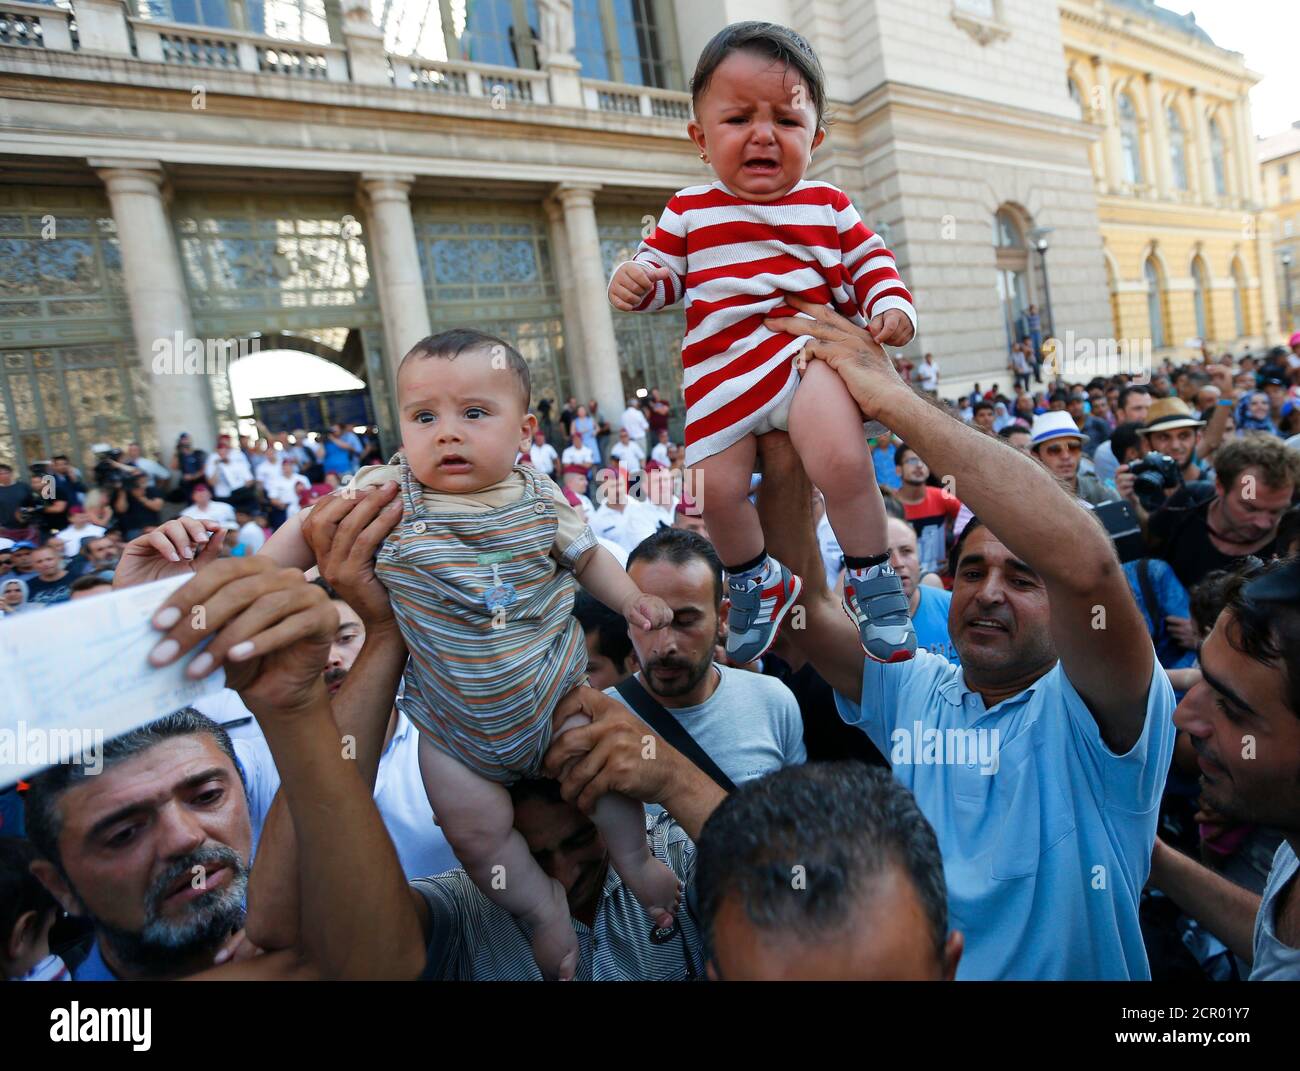 Migrants wave their train tickets and lift up children outside the main Eastern Railway station in Budapest, Hungary, September 1, 2015. Hungary closed Budapest's main Eastern Railway station on Tuesday morning with no trains departing or arriving until further notice, a spokesman for state railway company MAV said. There are hundreds of migrants waiting at the station. People have been told to leave the station and police have lined up at the main entrance, national news agency MTI reported.  REUTERS/Laszlo Balogh Stock Photo